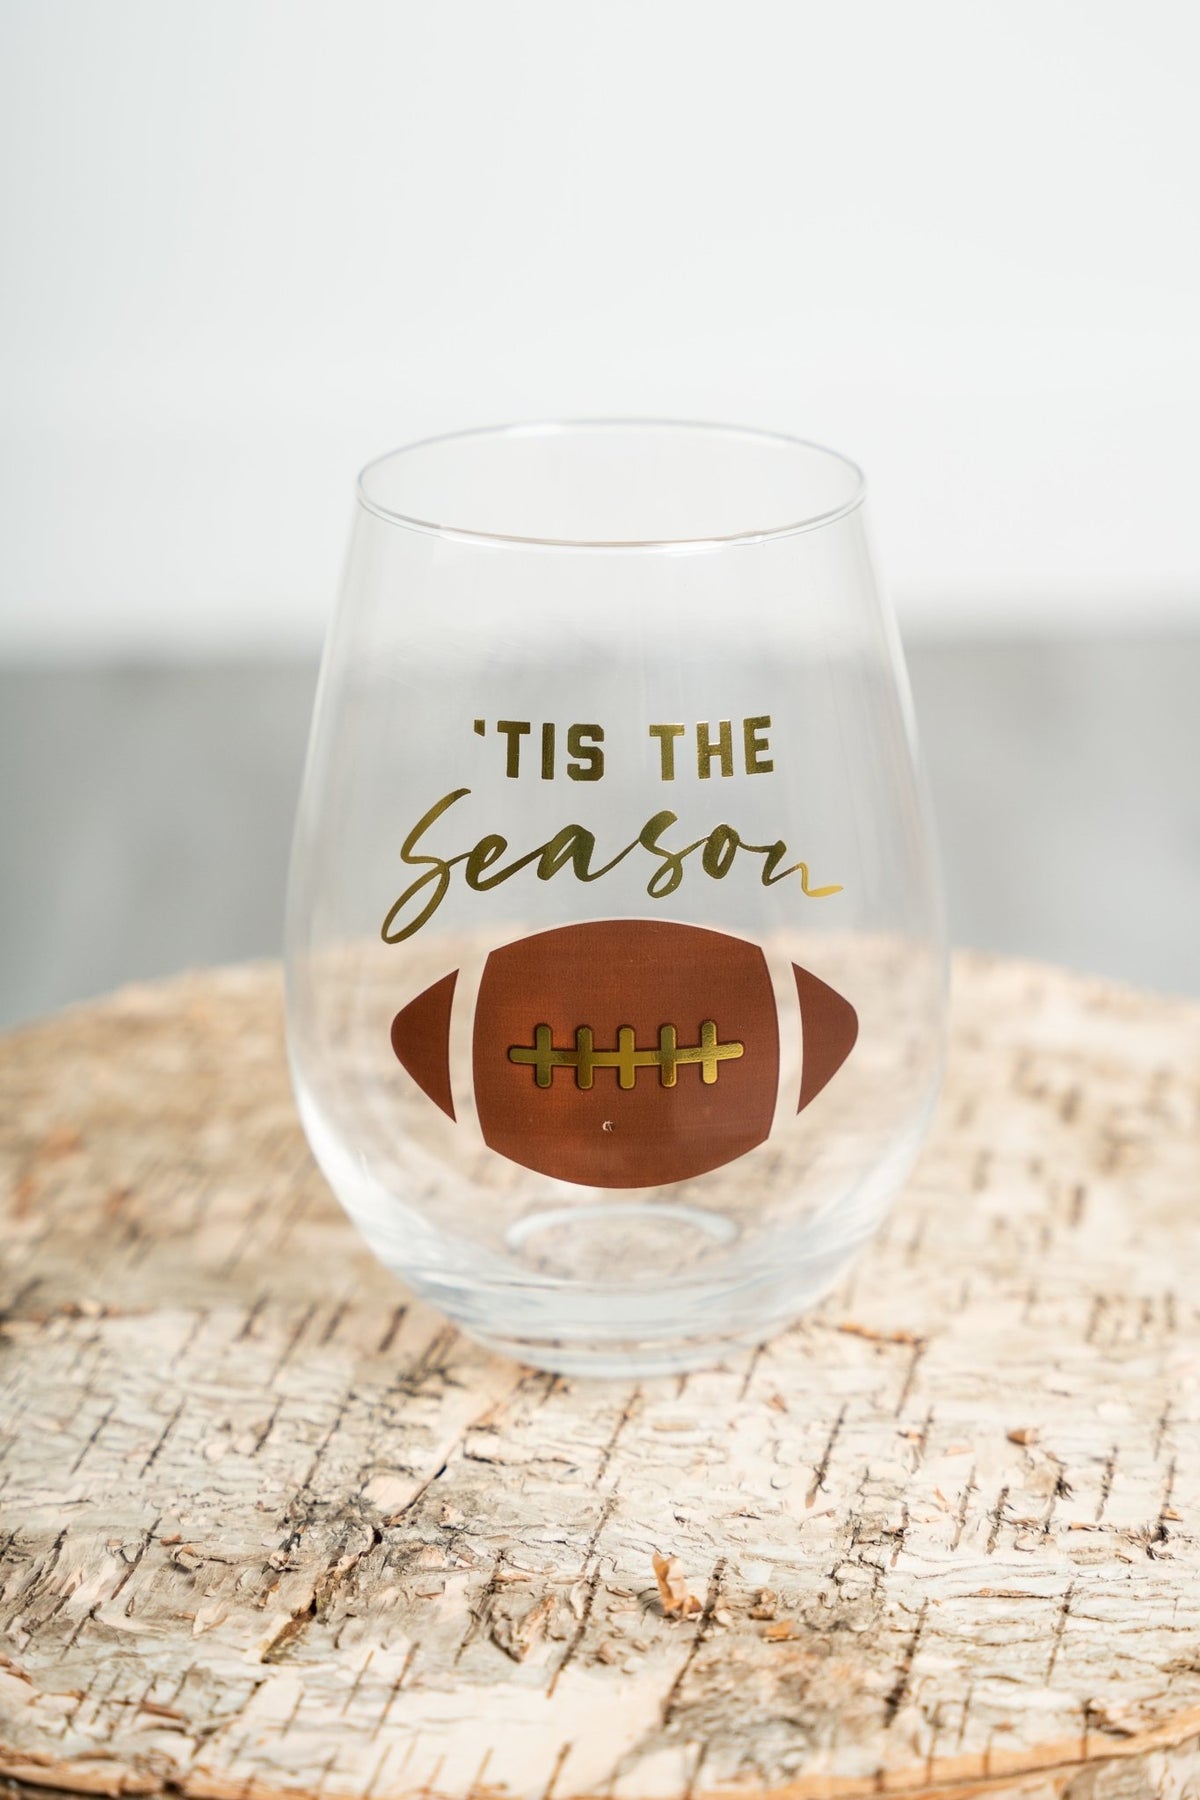 Tis the season jumbo wine glass - Trendy Tumblers, Mugs and Cups at Lush Fashion Lounge Boutique in Oklahoma City